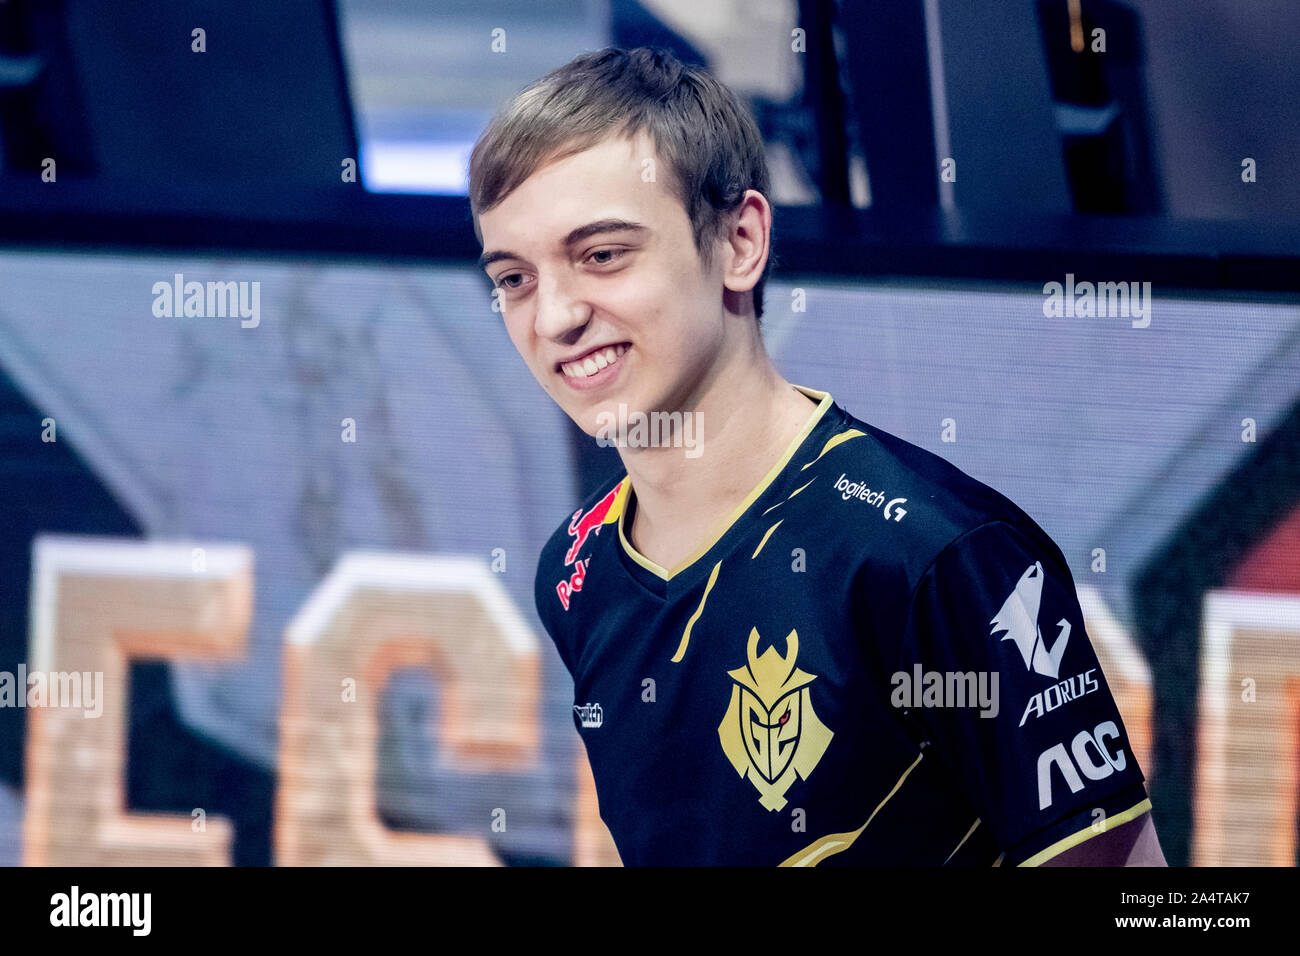 13 October 2019, Berlin: Rasmus "Caps" Borregaard Winther, Danish e-athlete  at G2 Esports, smiles at the group stage of the E-Sport "League of Legends"  World Championship at the Verti Music Hall as